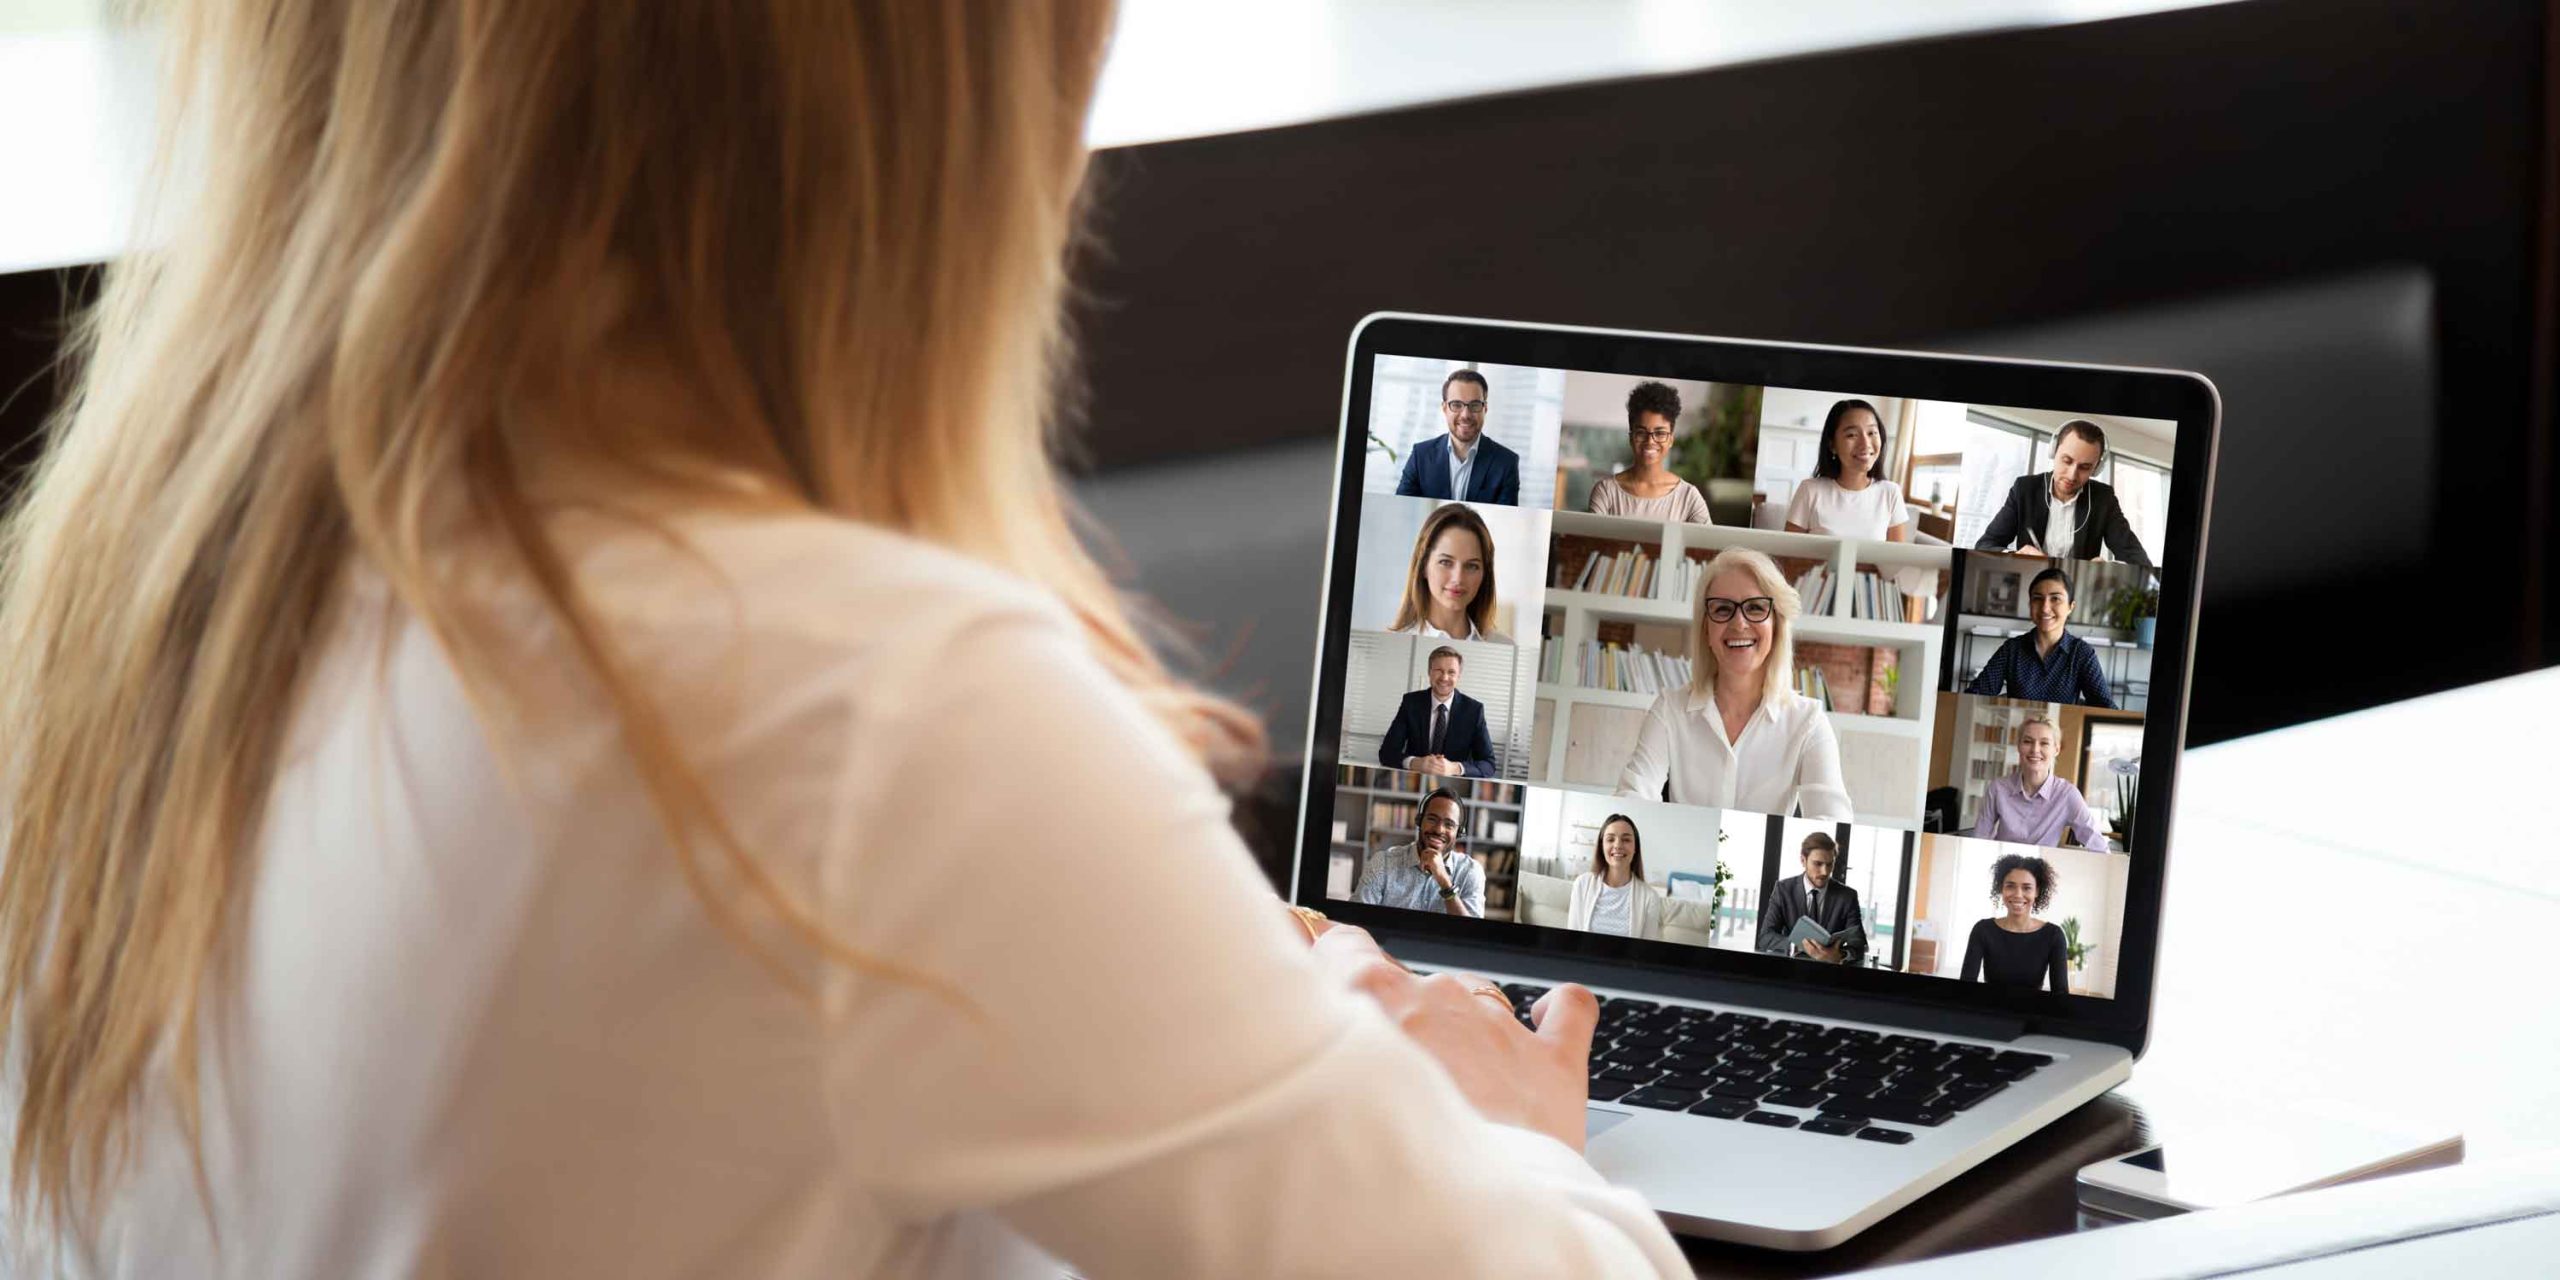 View over businesswoman shoulder during group video call